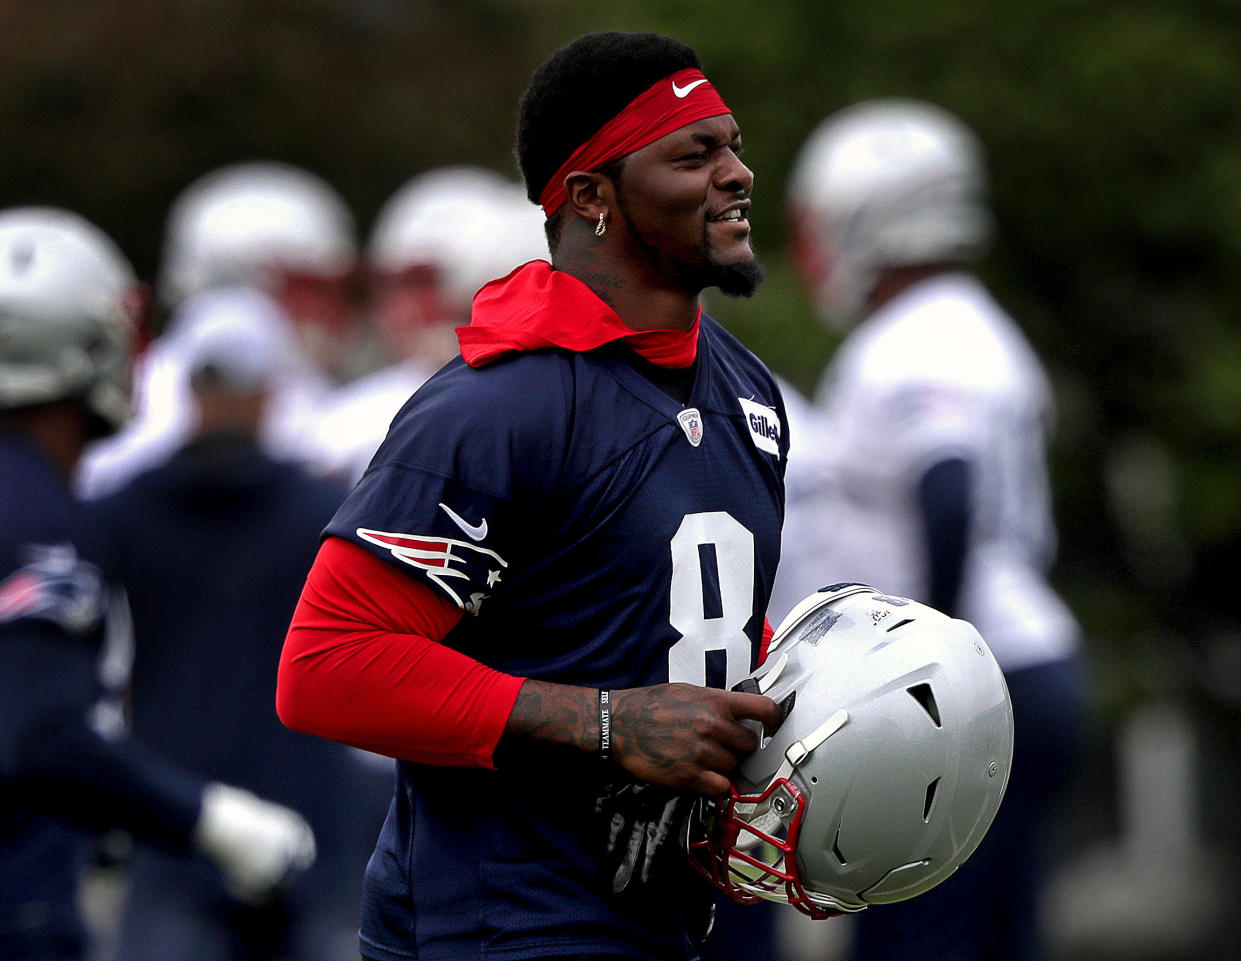 Jamie Collins has played five total seasons in New England, first from 2013-2016 and then again in 2019. (Photo by Barry Chin/The Boston Globe via Getty Images)